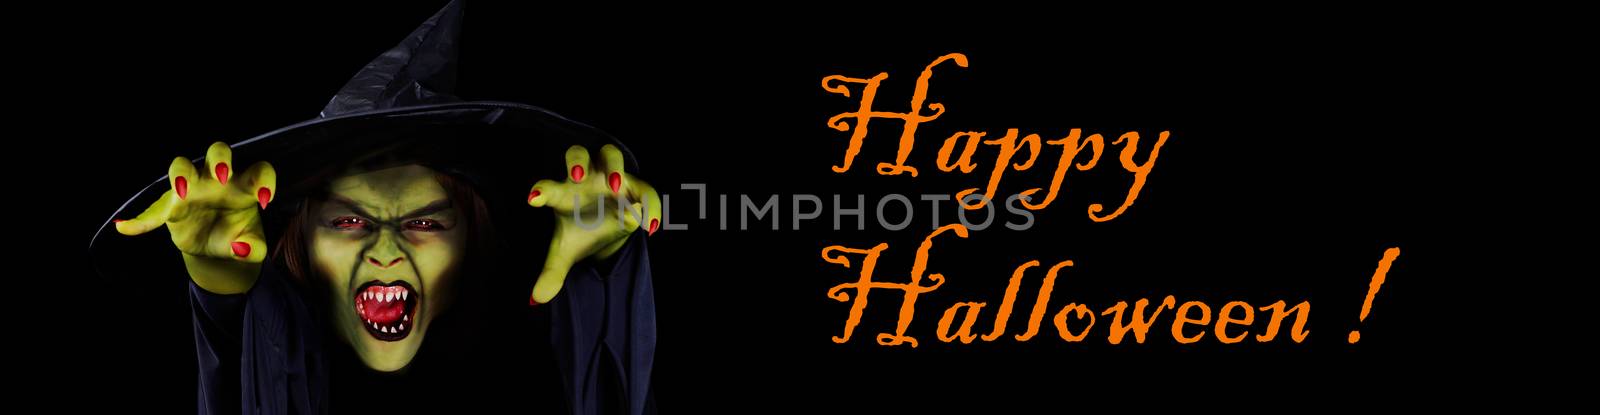 Scary wicked witch trying to catch viewer, Halloween banner